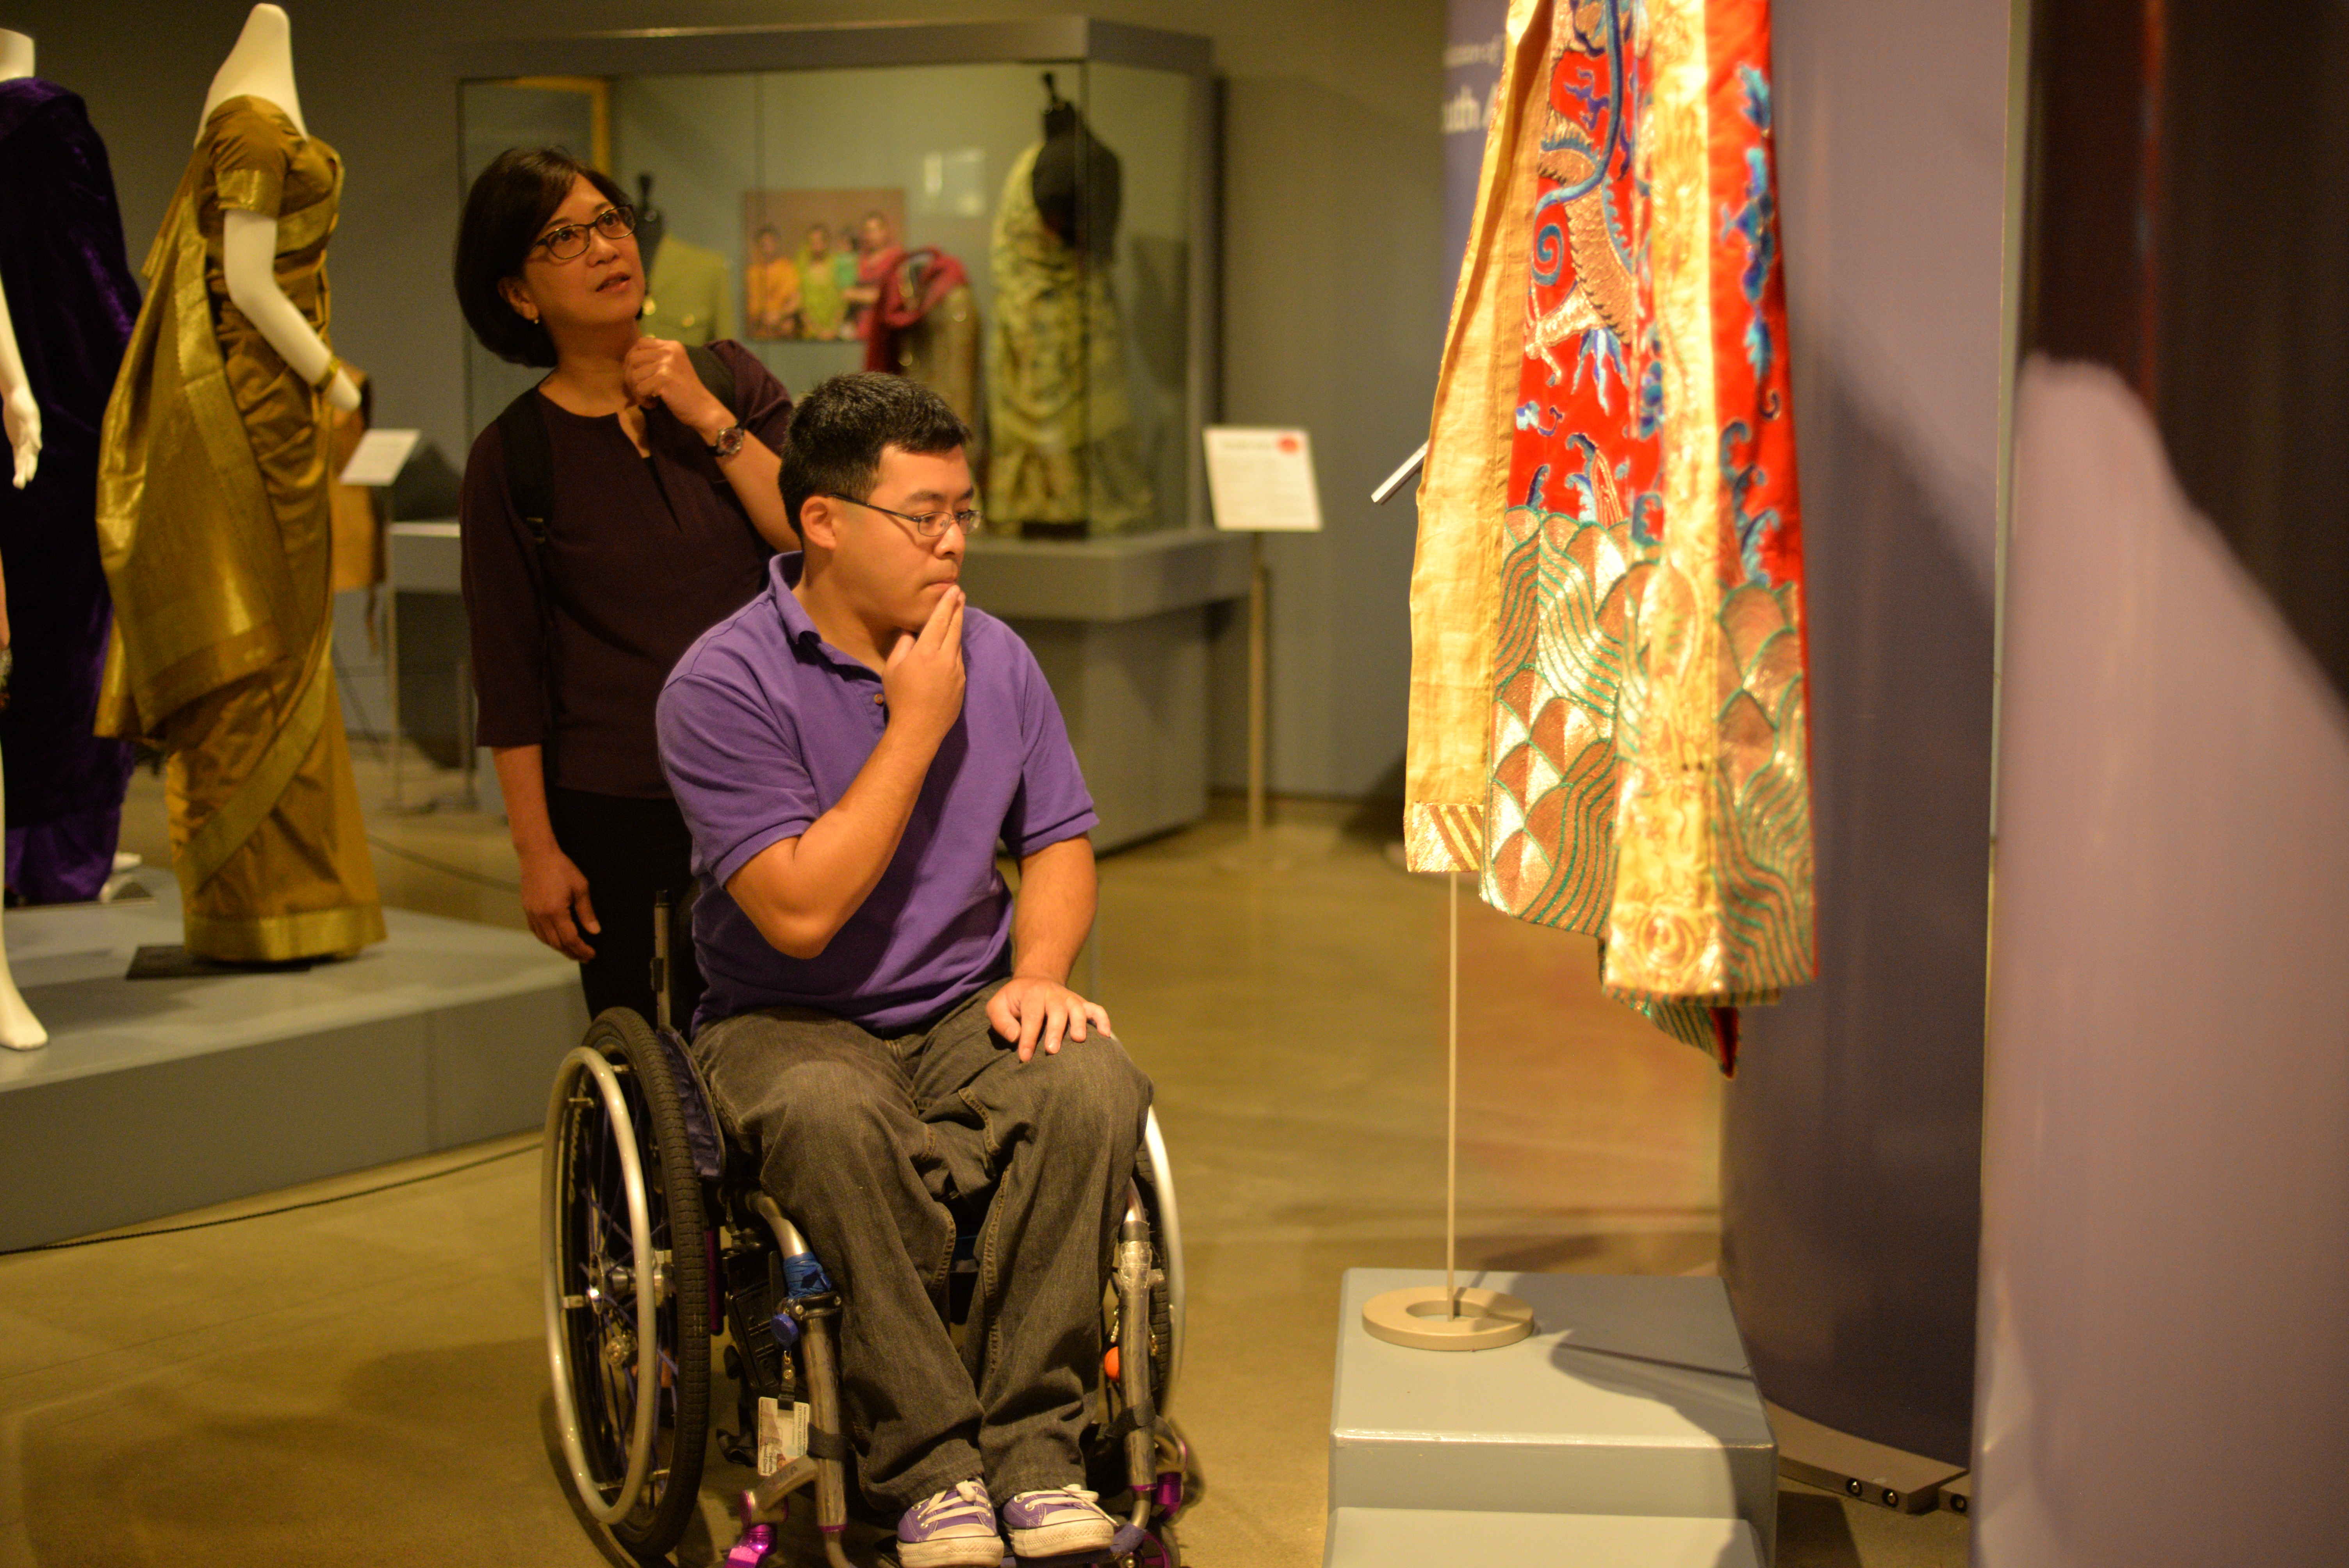 Man with black hair and glasses in a purple t-shirt using a wheelchair in a clothing exhibit. A woman wearing a brown shirt is standing behind him.